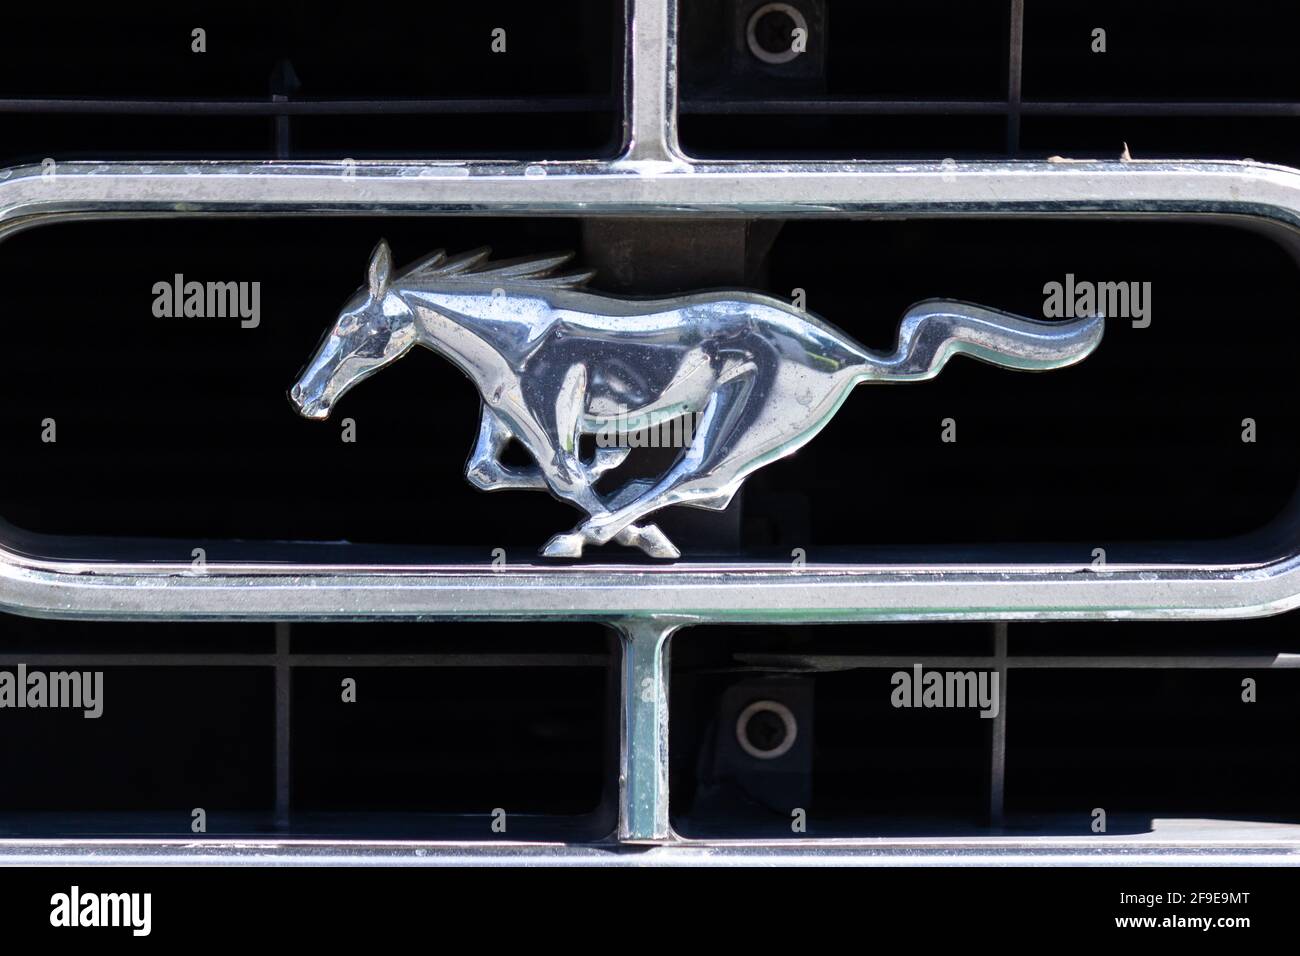 Classic Ford Mustang grill emblem Stock Photo